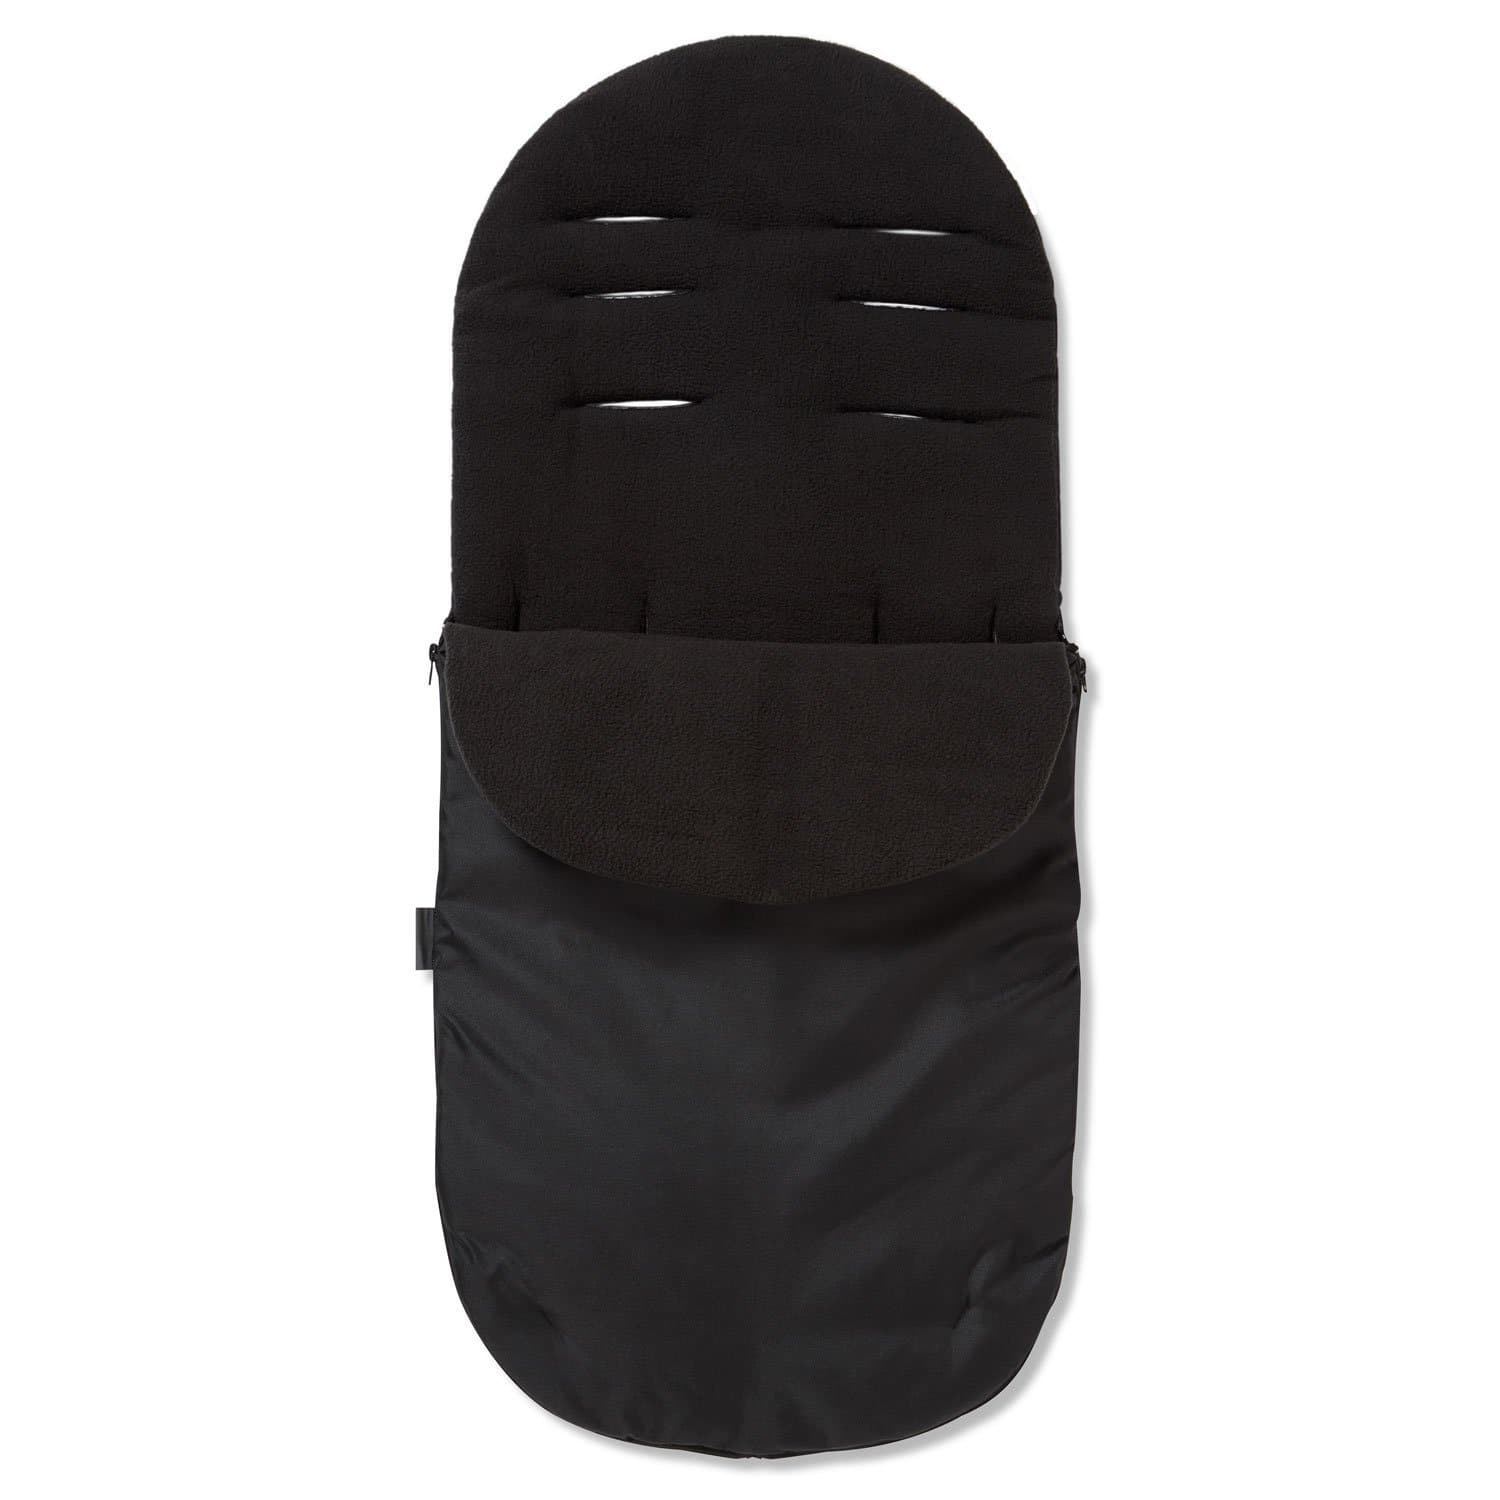 Footmuff / Cosy Toes Compatible with Obaby - Black / Fits All Models | For Your Little One